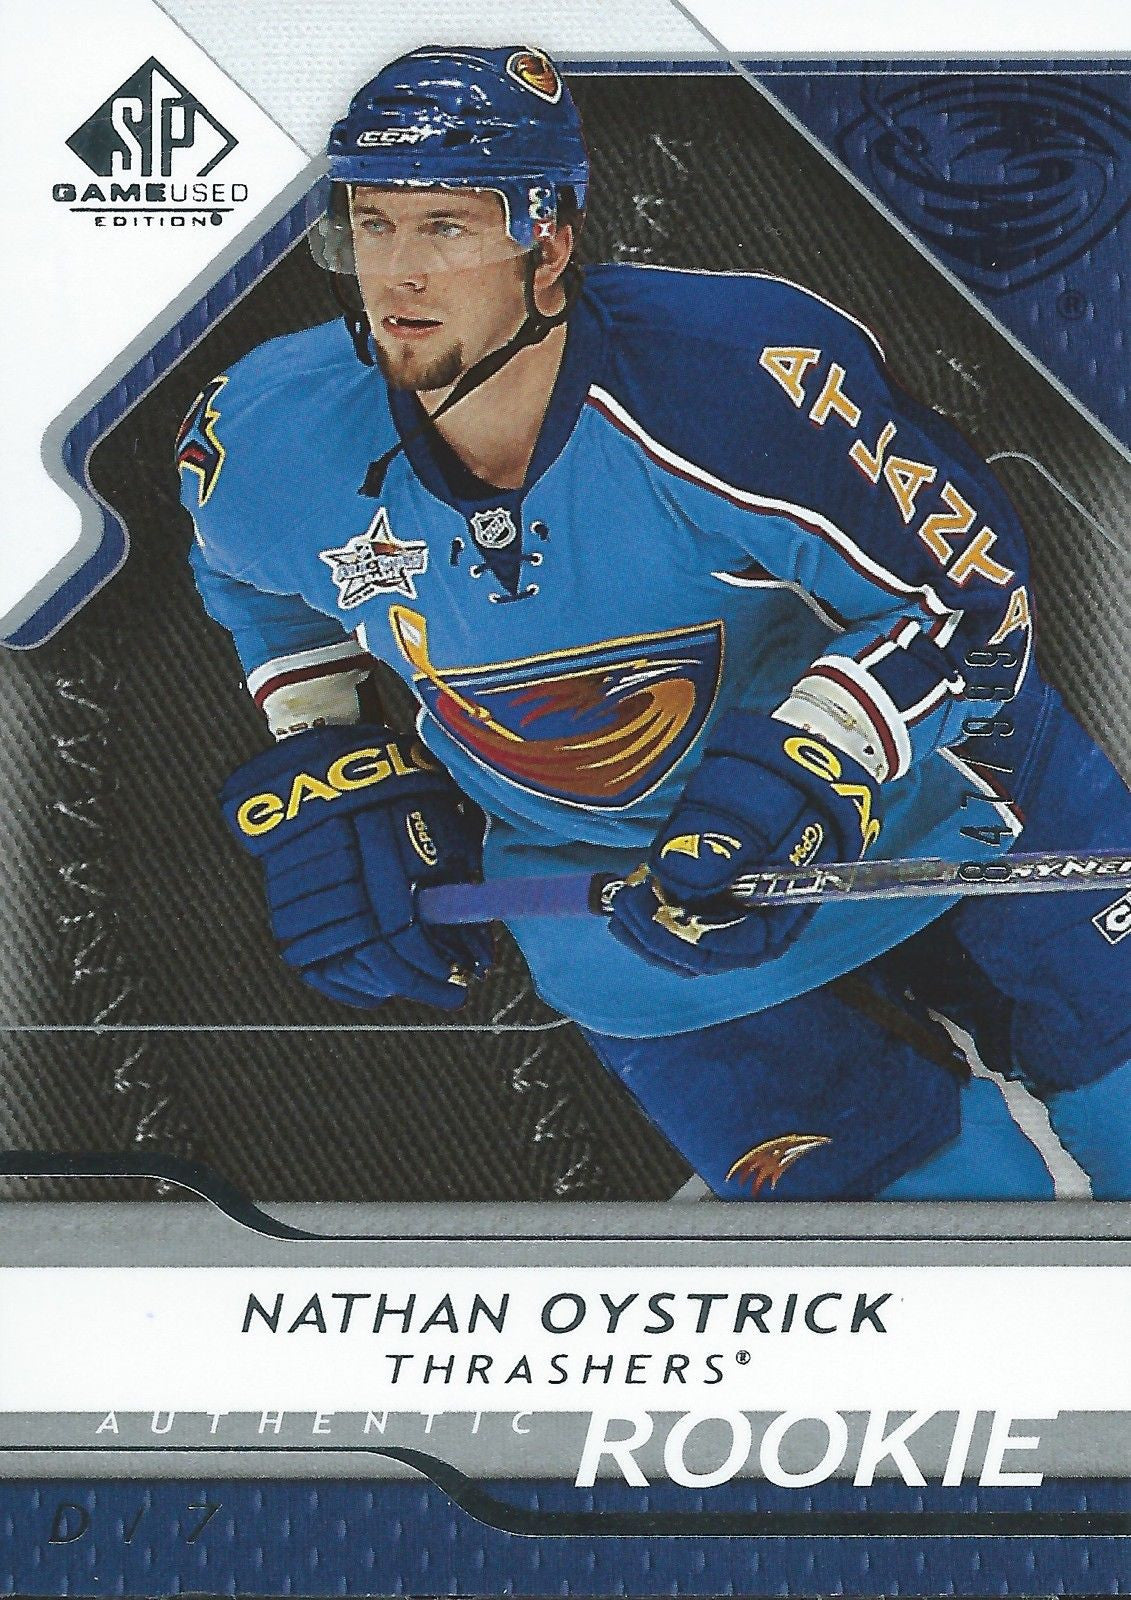 2008-09 SP Game Used NATHAN OYSTRICK Rookie /999 Upper Deck RC NHL 01001